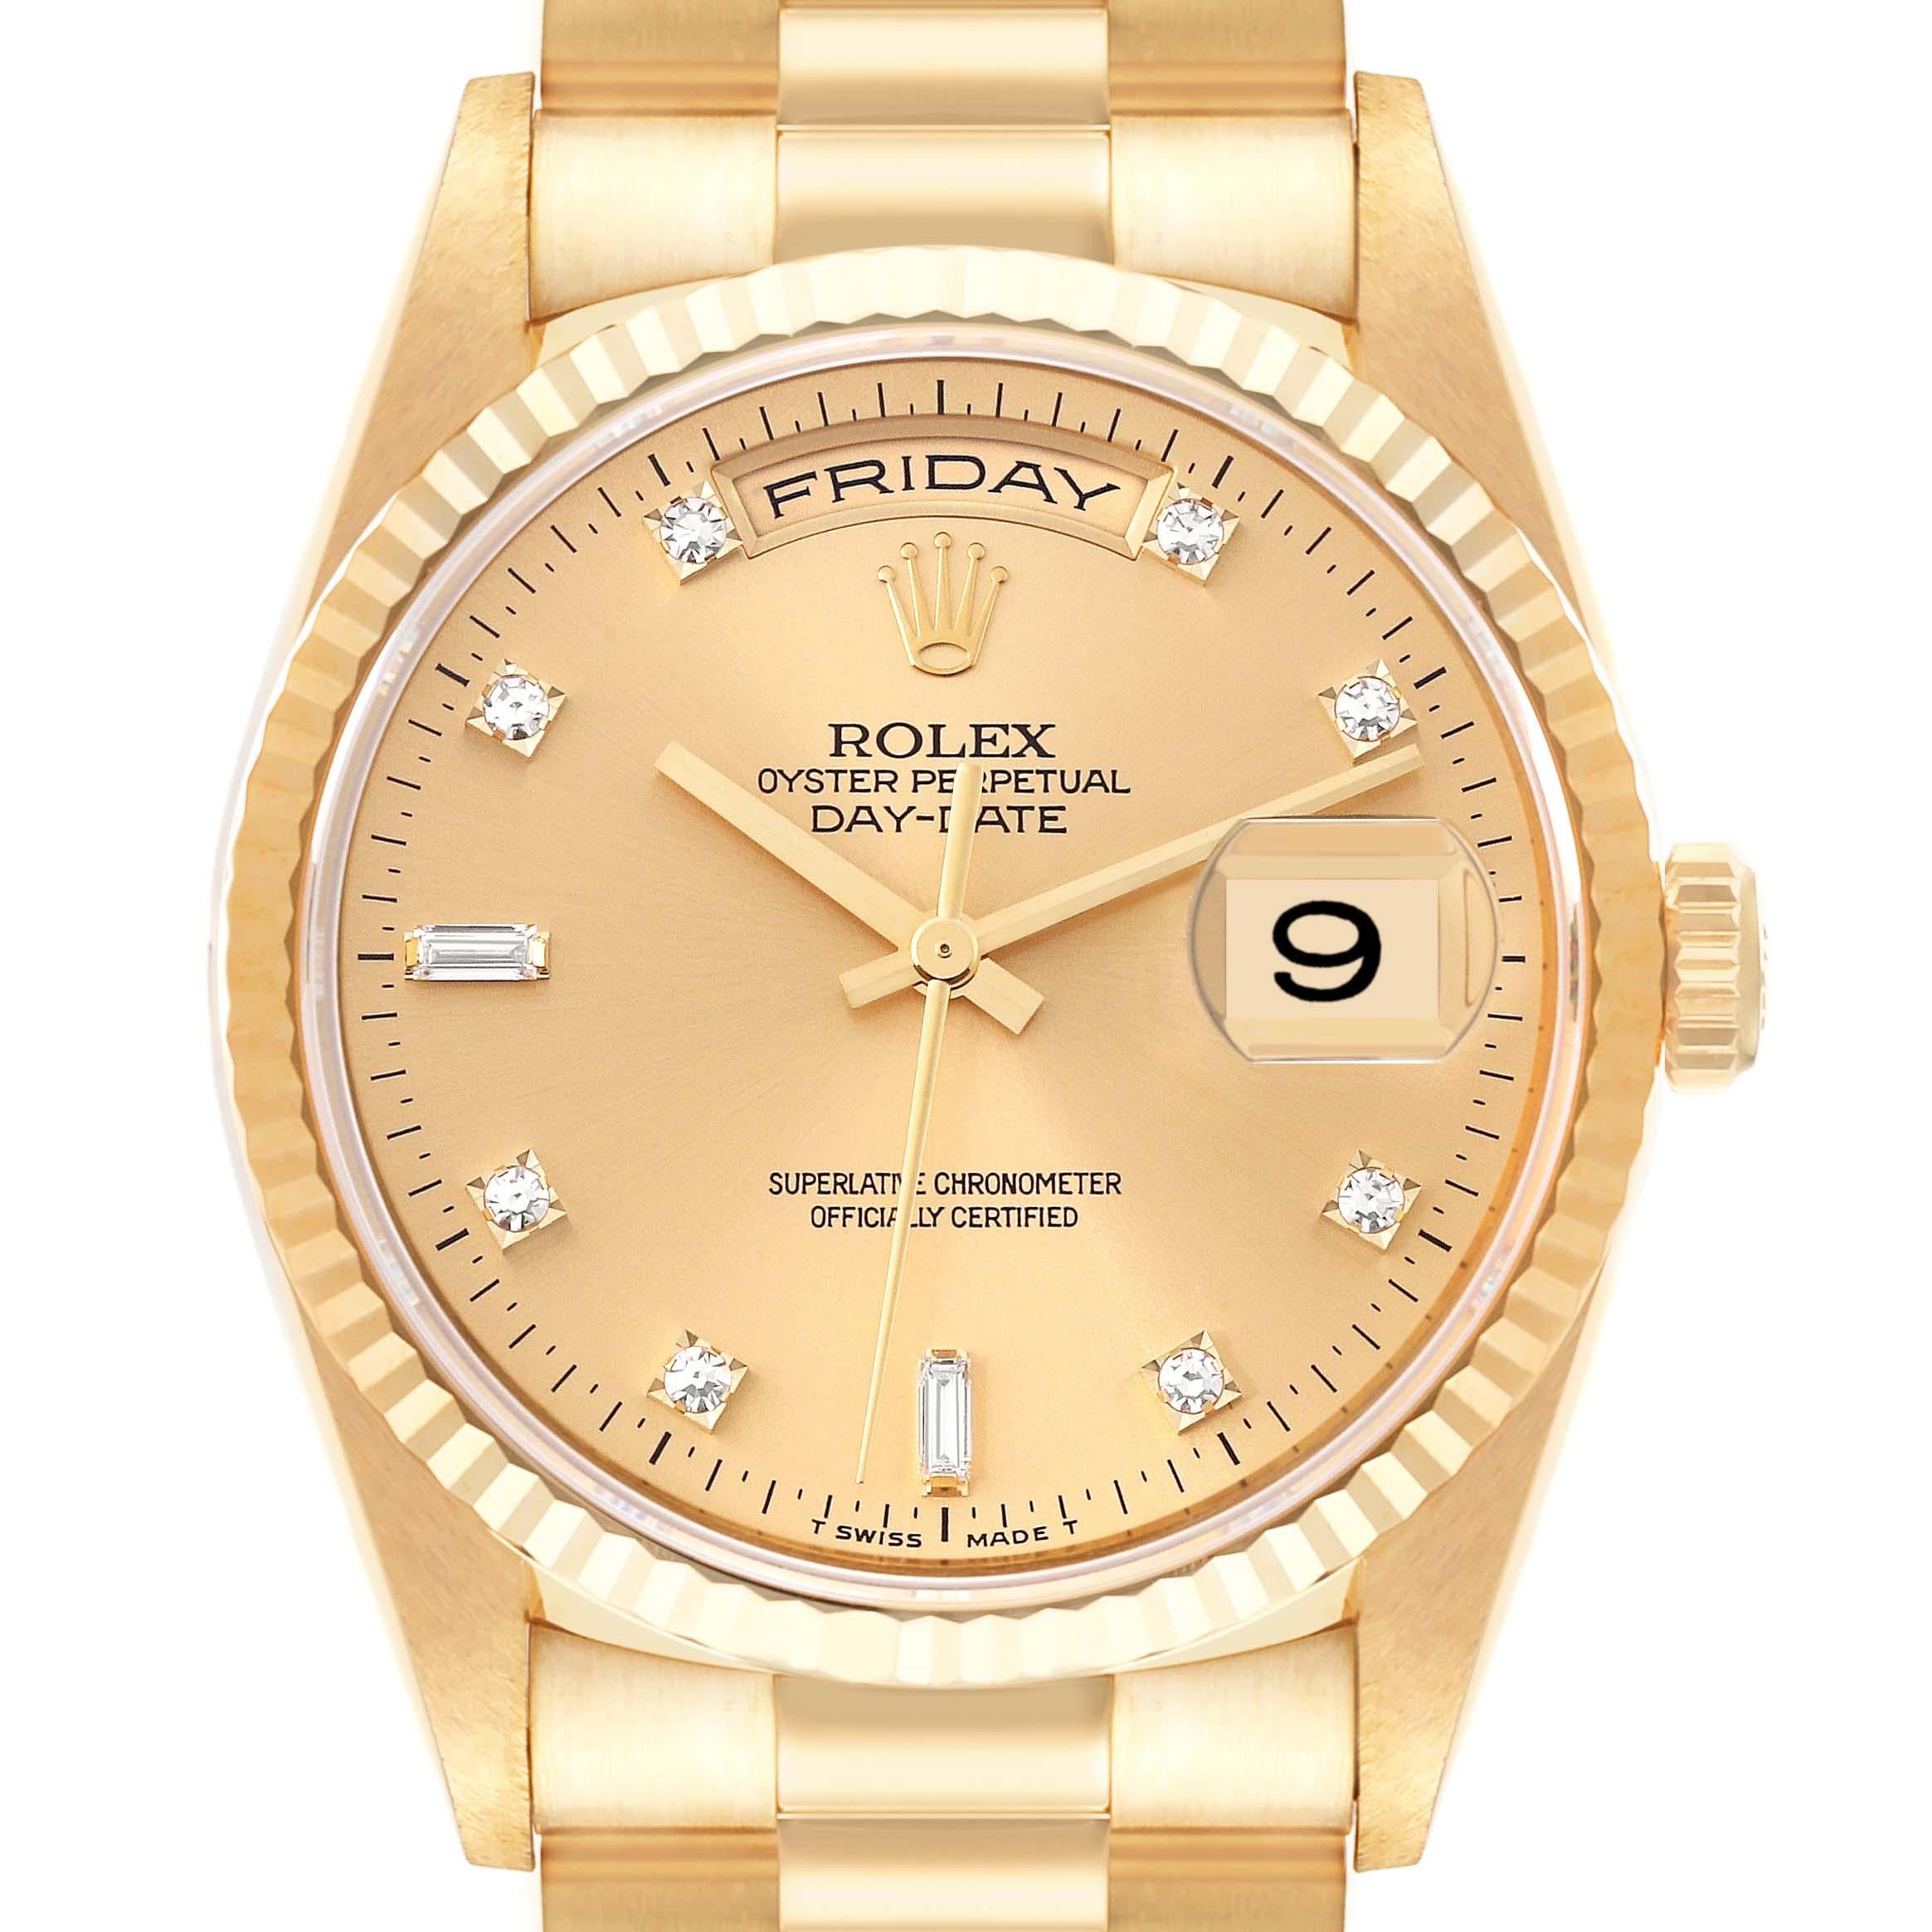 Rolex President Day-Date Yellow Gold Diamond Mens Watch 18238. Officially certified chronometer automatic self-winding movement. 18k yellow gold oyster case 36.0 mm in diameter. Rolex logo on the crown. 18K yellow gold fluted bezel. Scratch